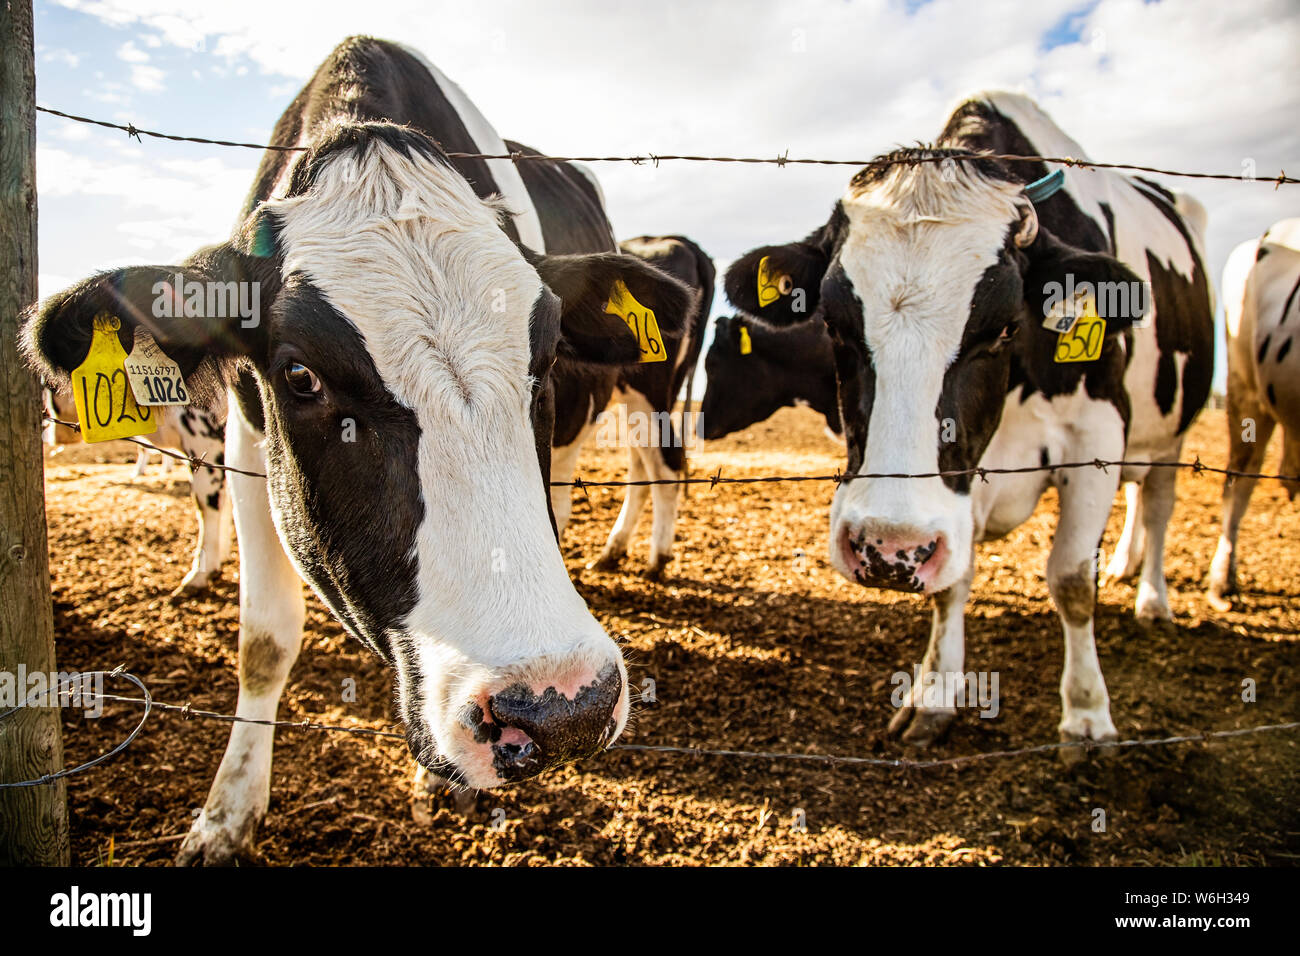 Two Holstein dairy cows curiously looking at the camera while standing in a corral with identification tags in their ears on a robotic dairy farm, ... Stock Photo